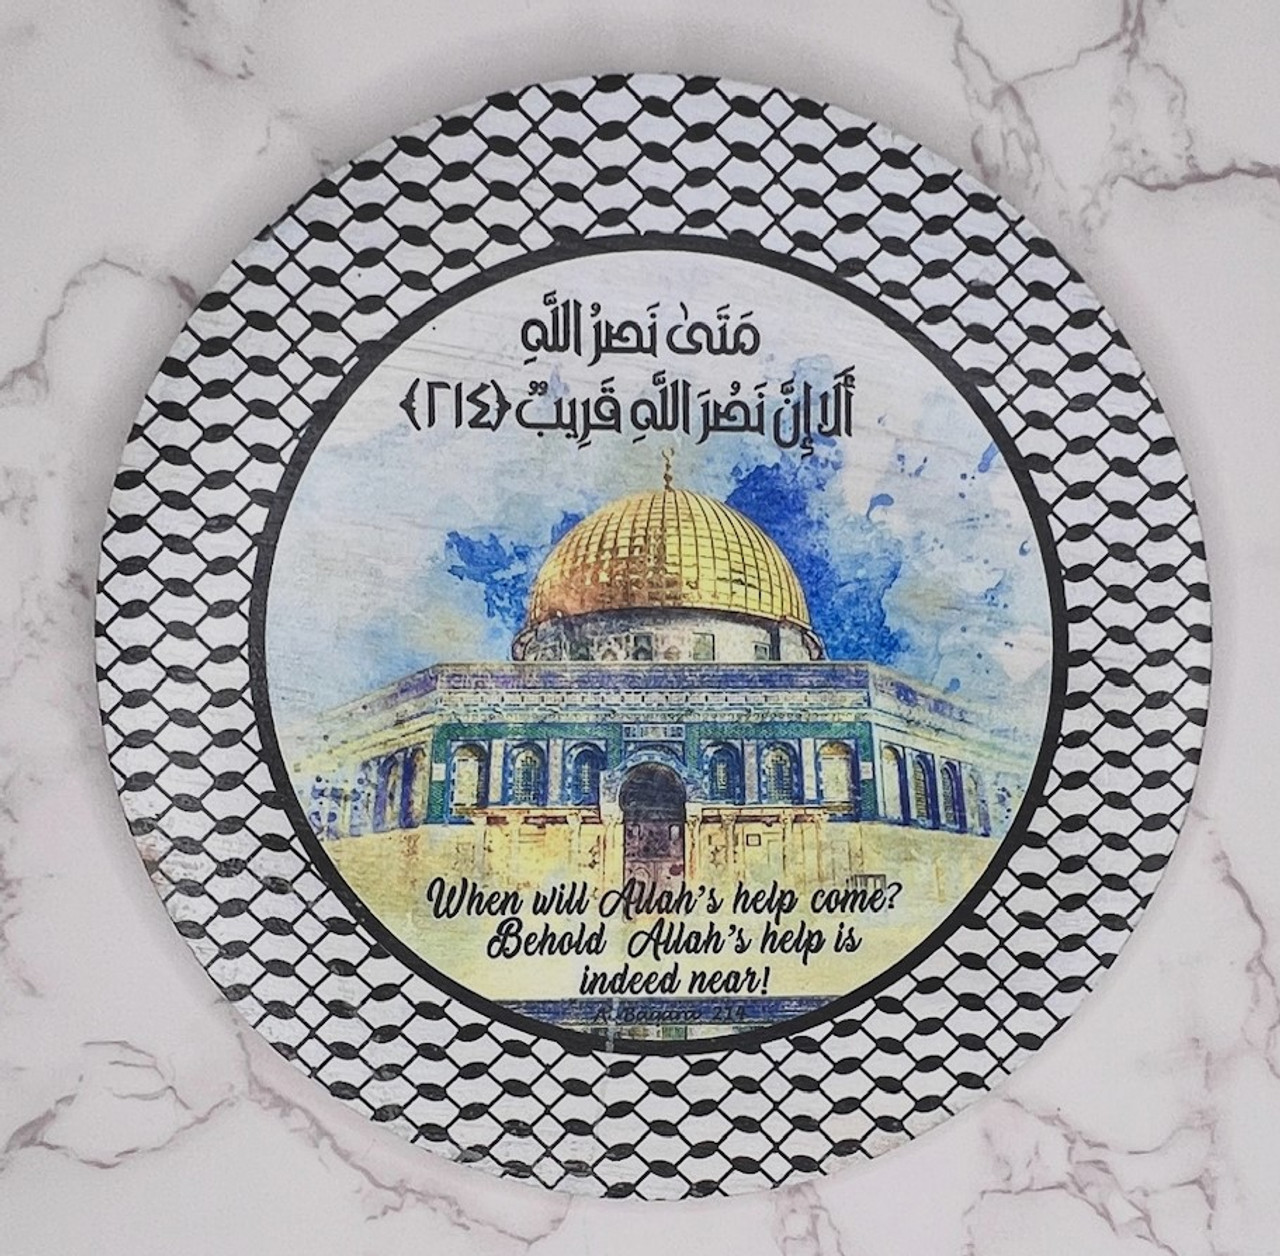 Dome of the Rock Duaa Round Plaque 